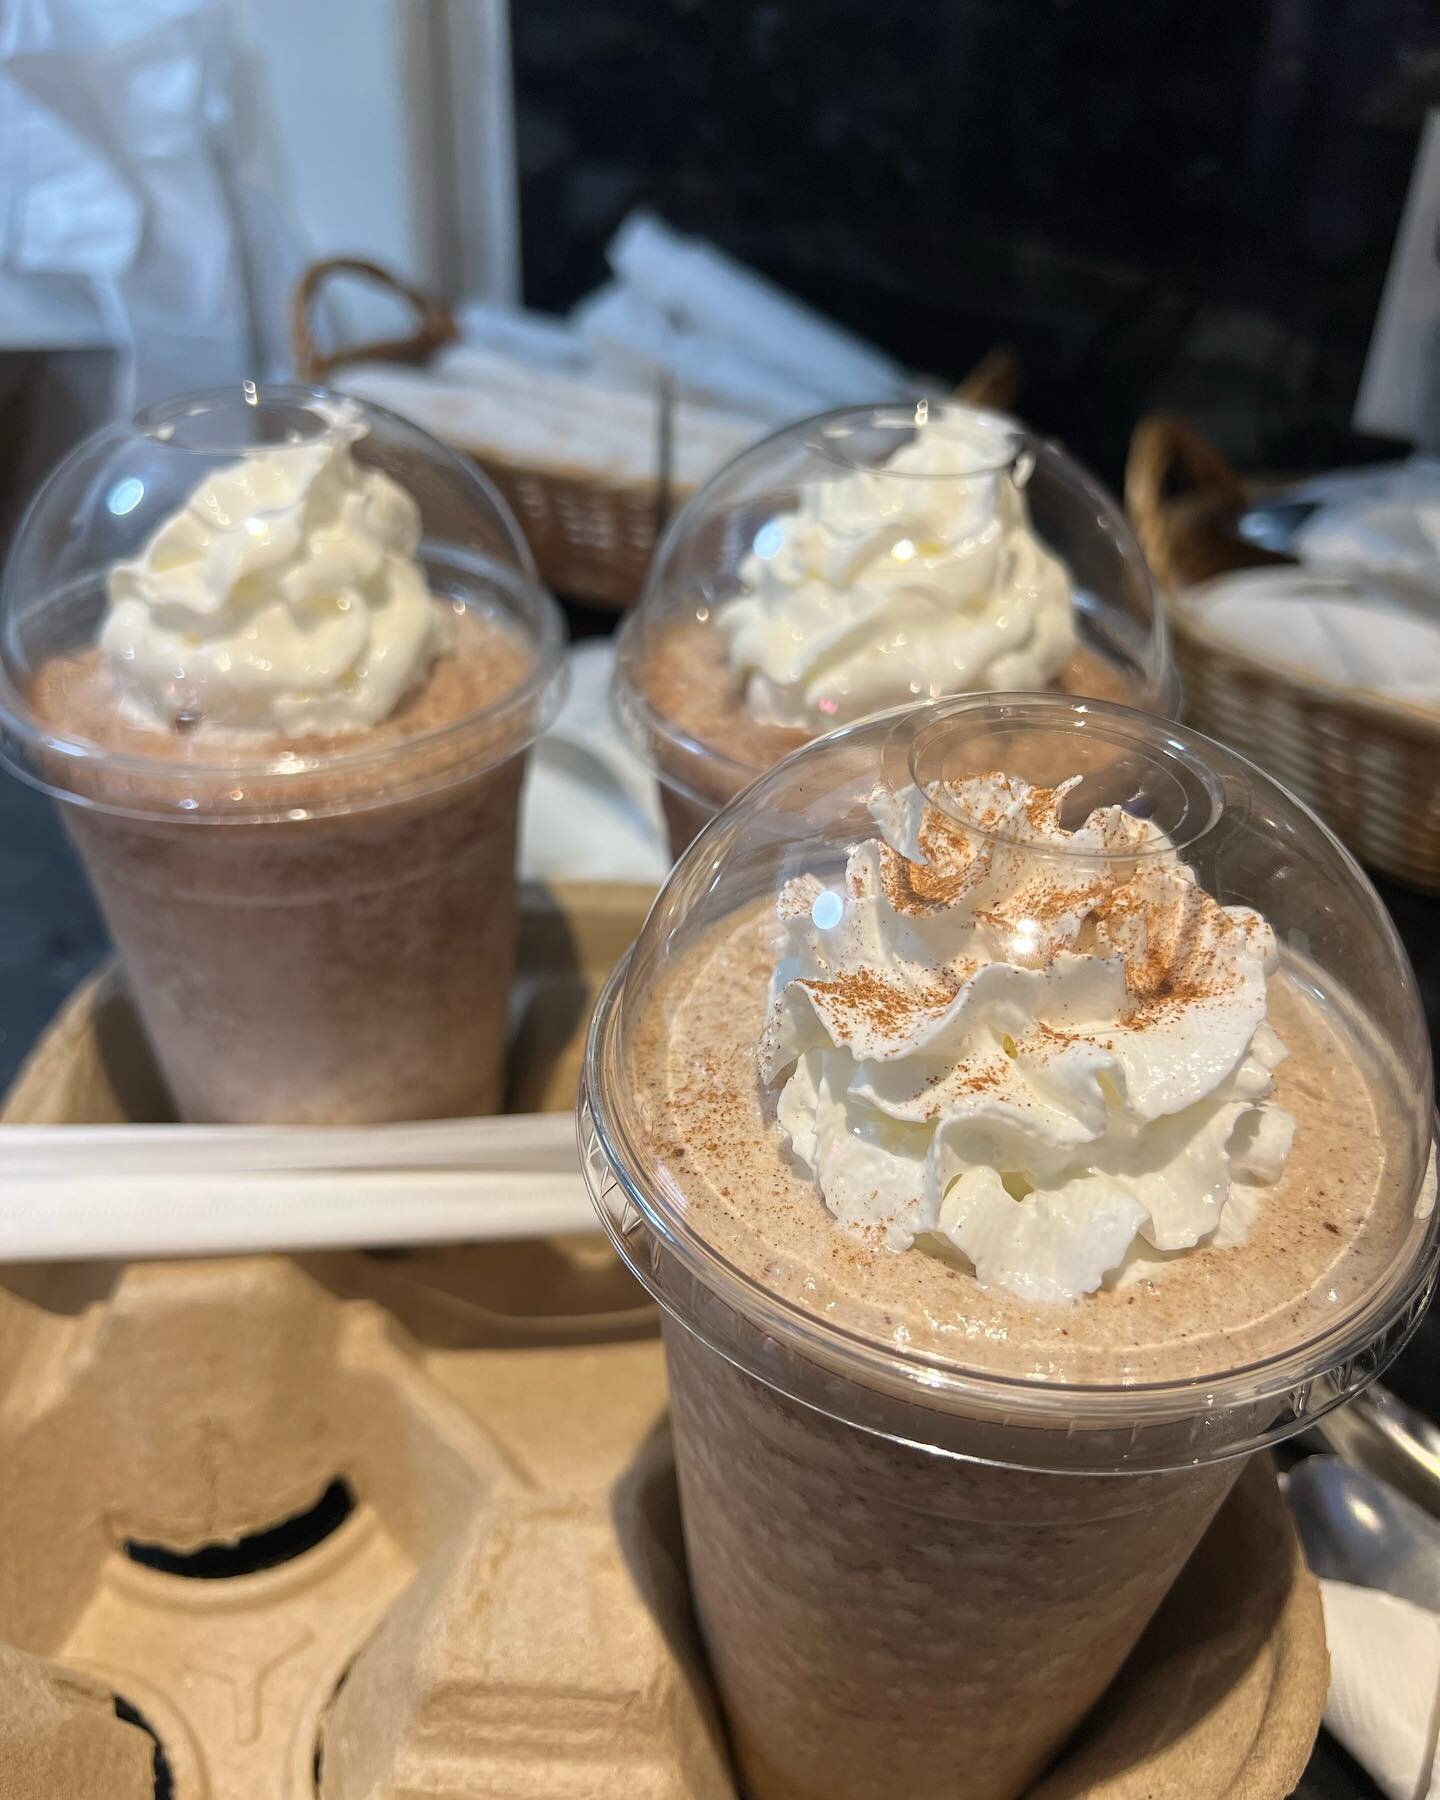 Cool off on these sunny days with our delicious frappuccinos! Available in a variety of flavors; this one pictured is Mexican Chocolate✨☕️

@visitoldtownsd 
#coffee #oldtown #sandiego #oldtownsandiego #sdcoffee